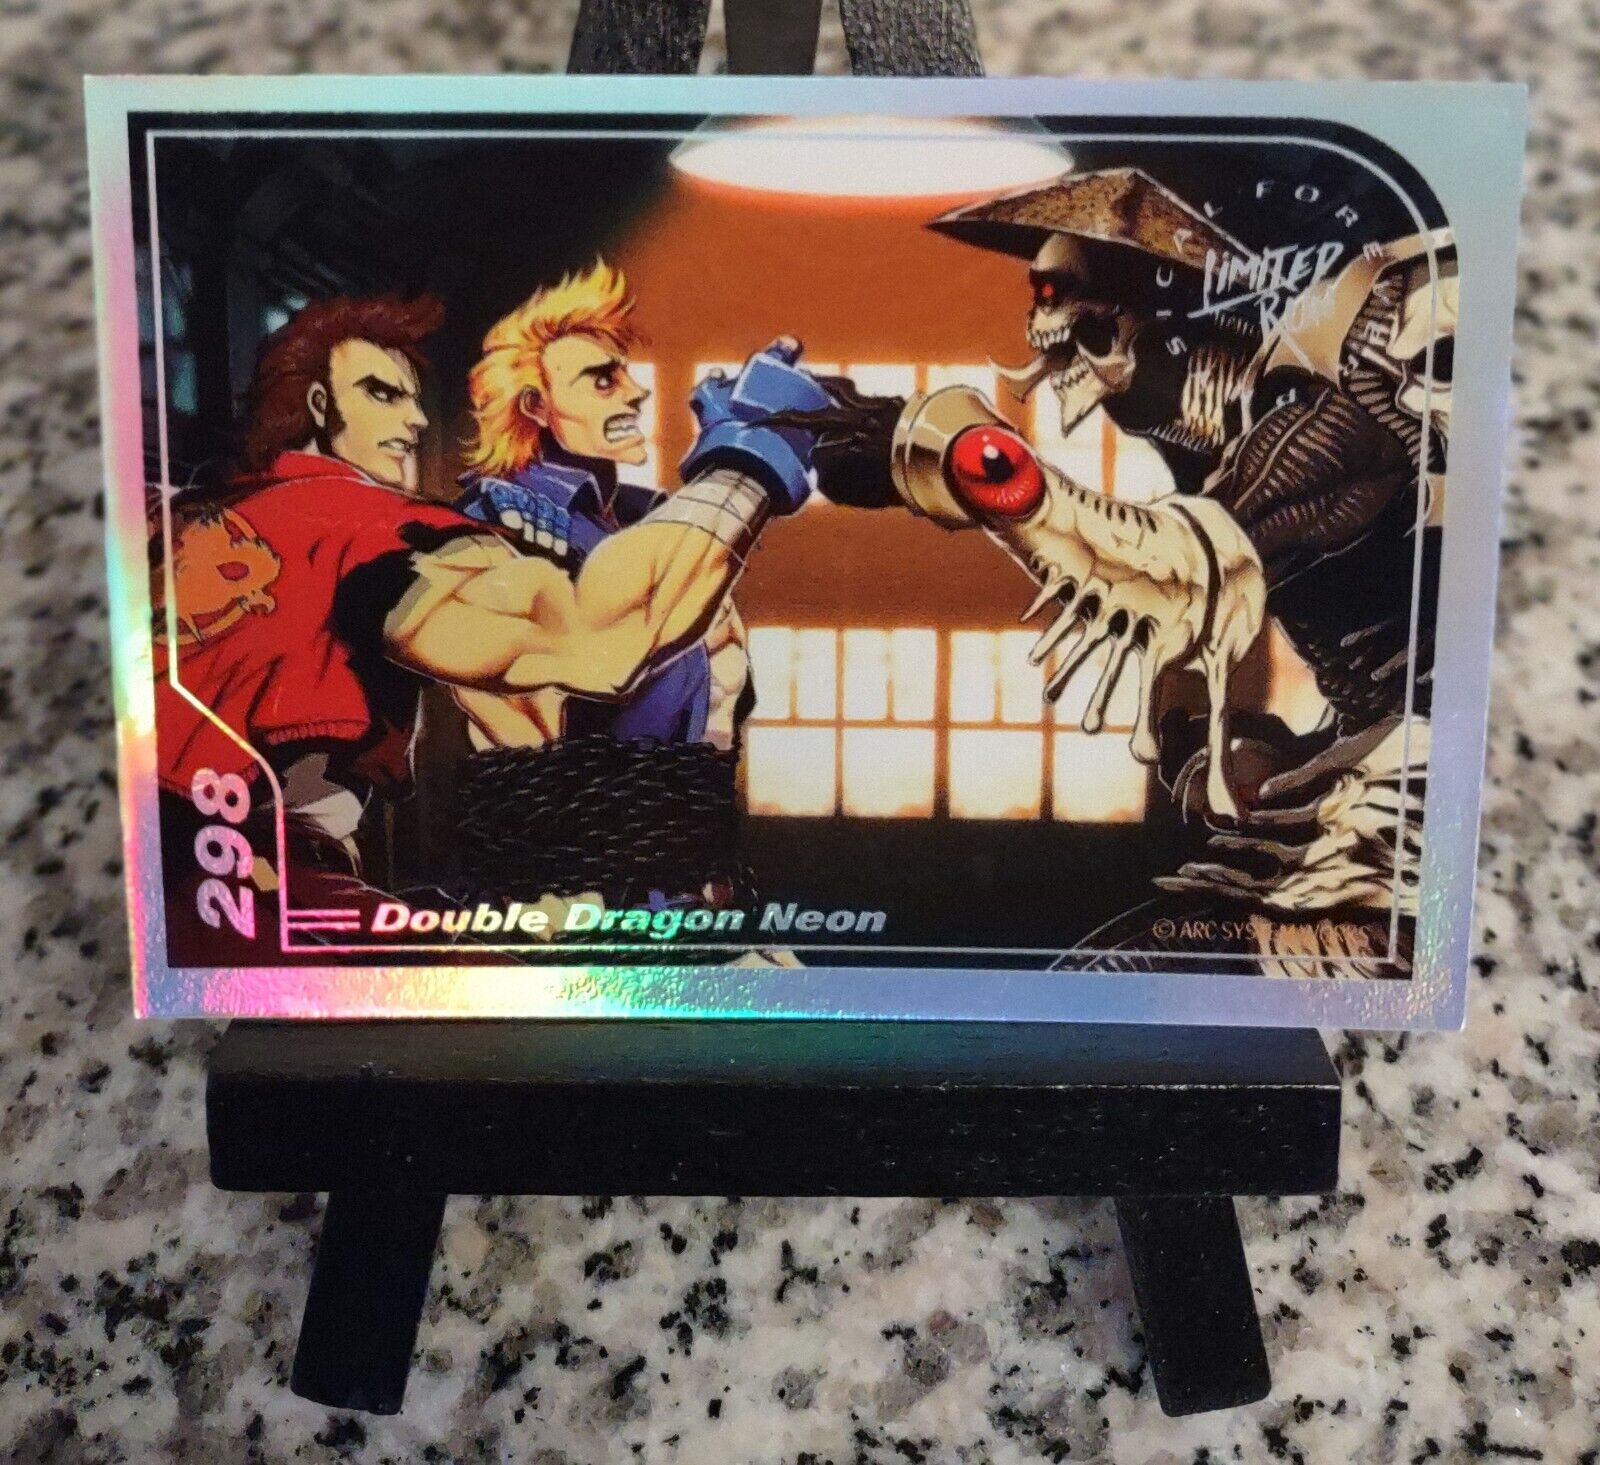 Limited Run Games Silver Trading Card #298 Double Dragon Neon Card Only No Game